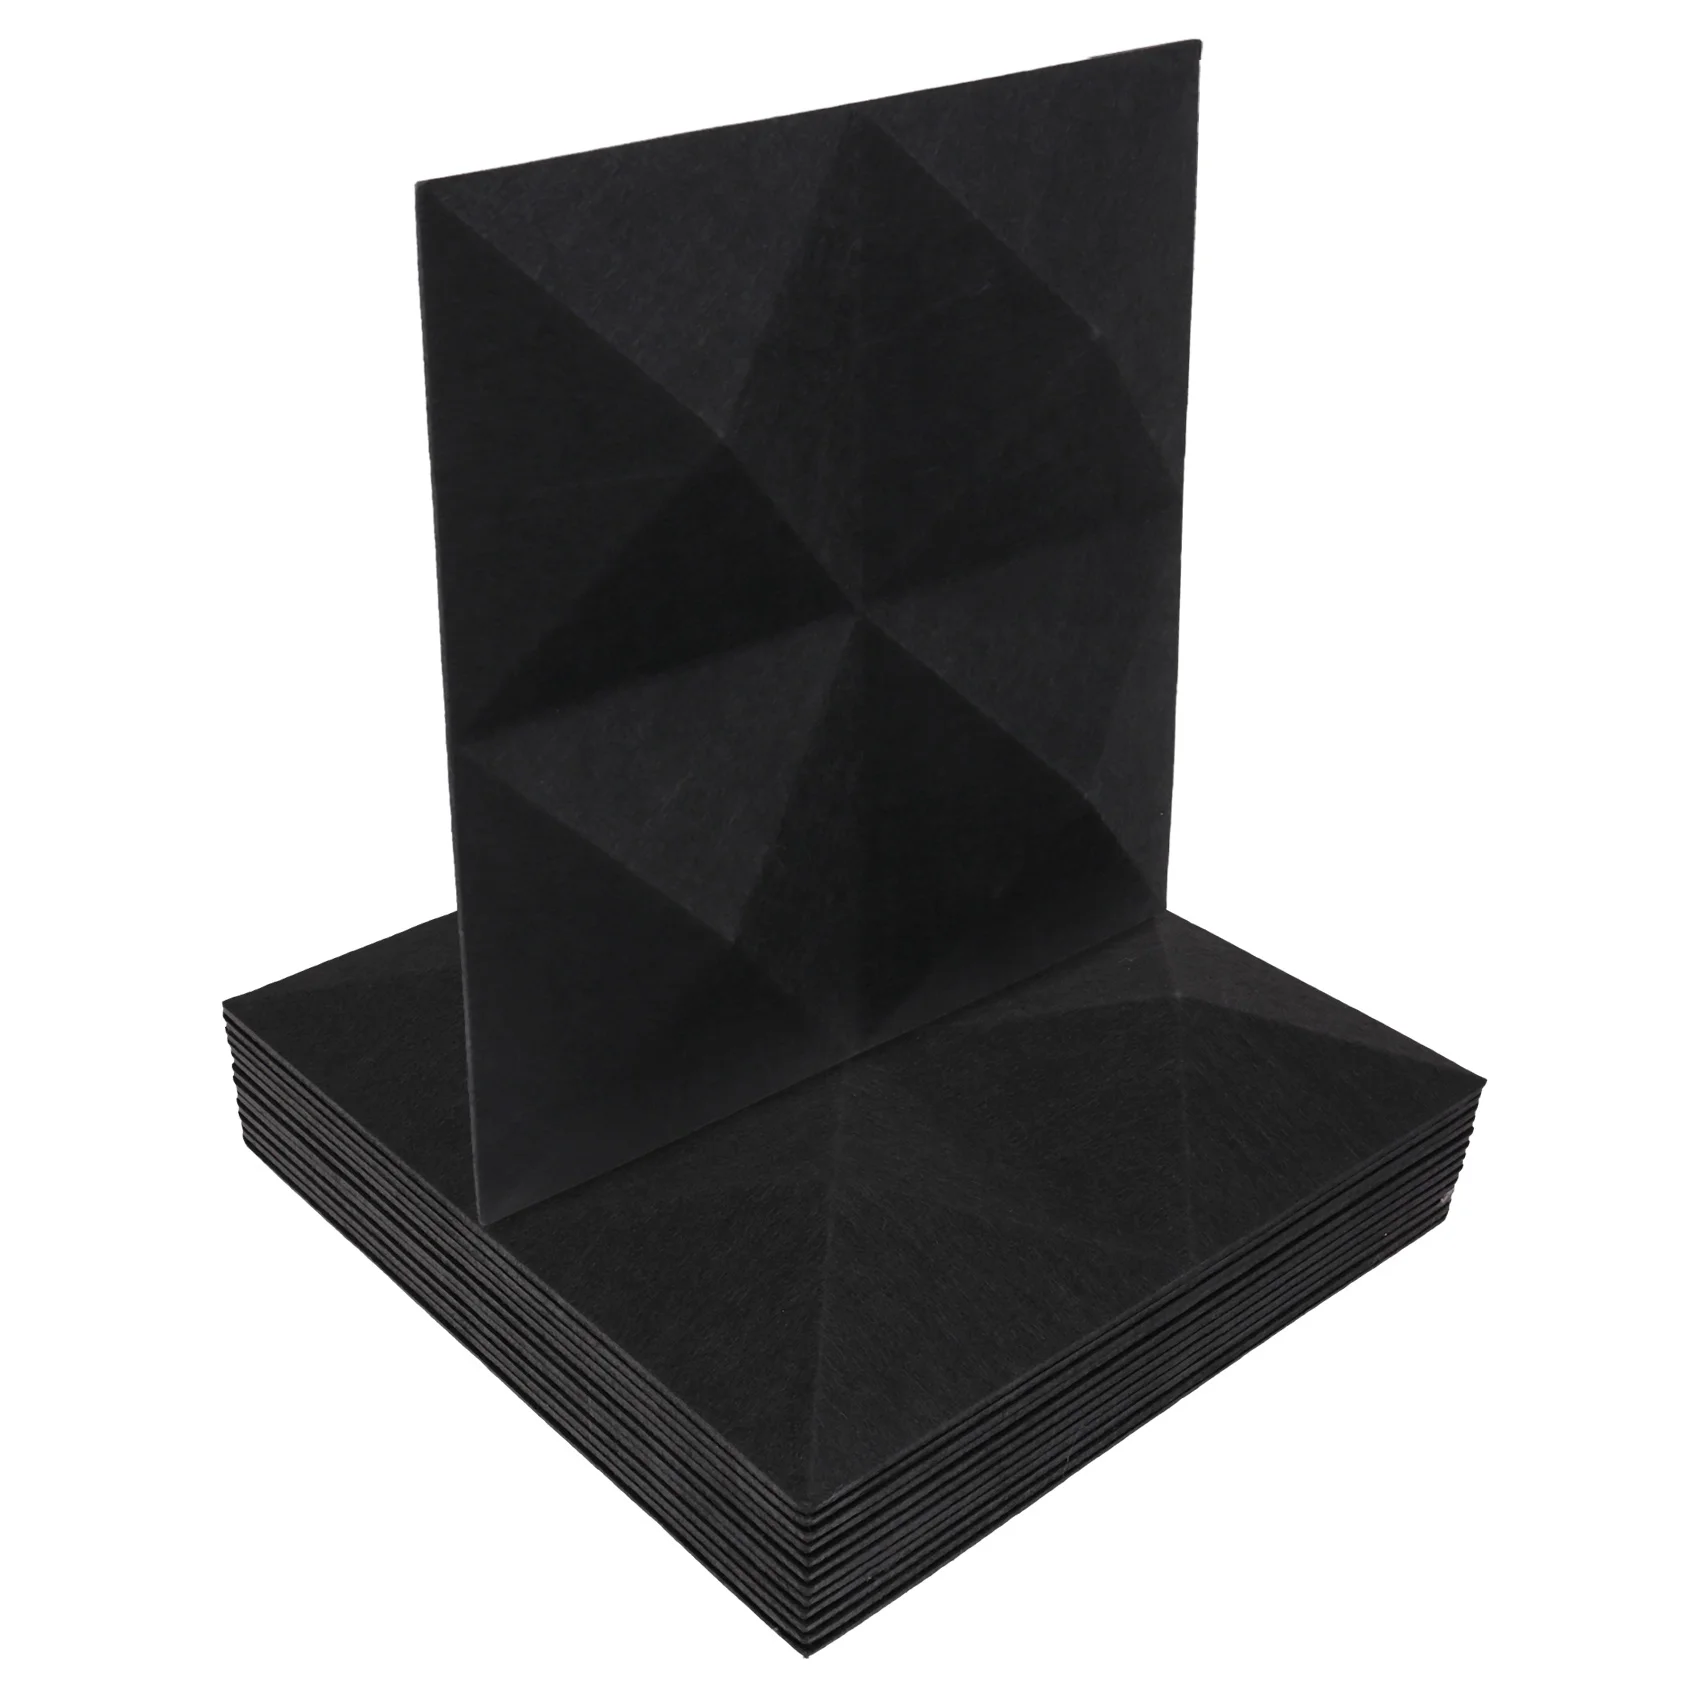 

12Pack Pyramid Acoustic Absorption Panel,12X12X0.12Inch Soundproofing Panel,Great for Wall Decoration,Black